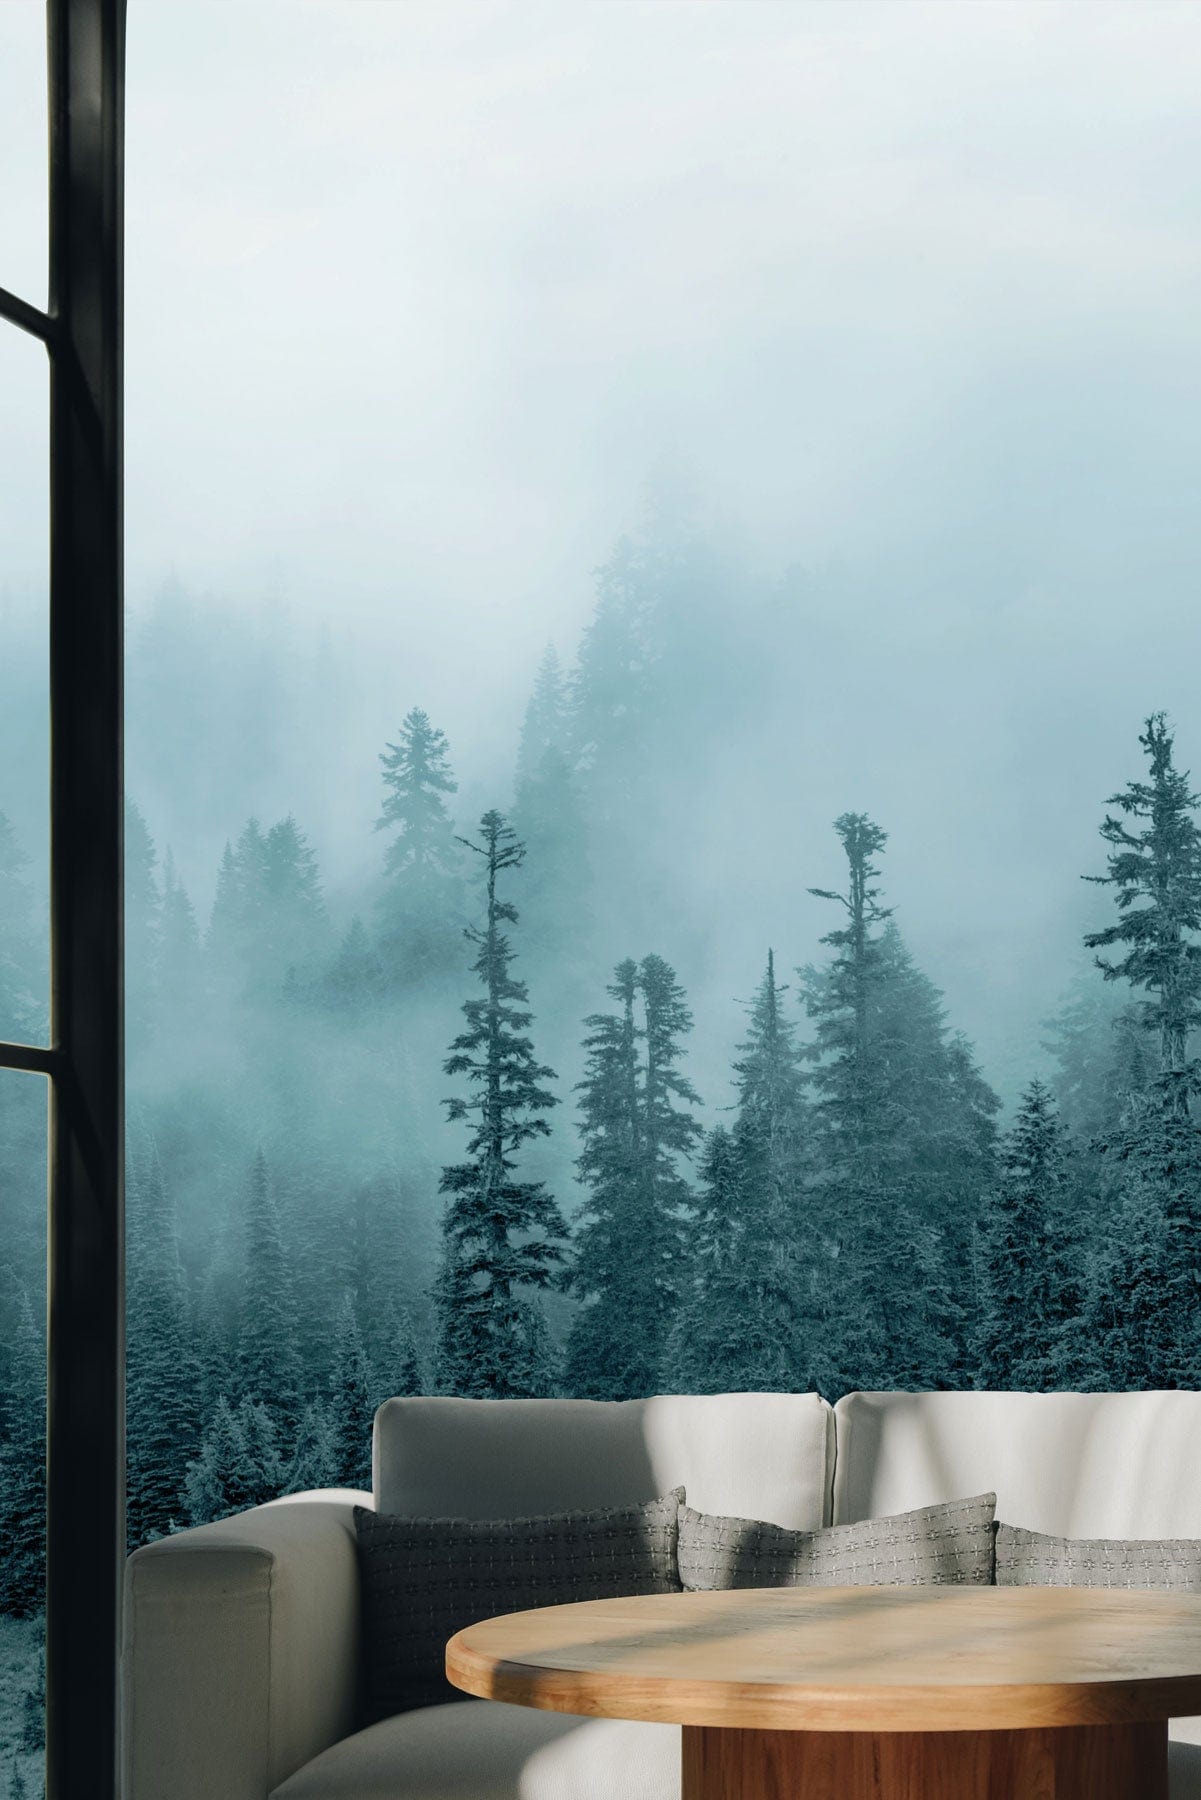 Chilling Wall Mural of a Misty Forest, Perfect for Decorating the Living Room